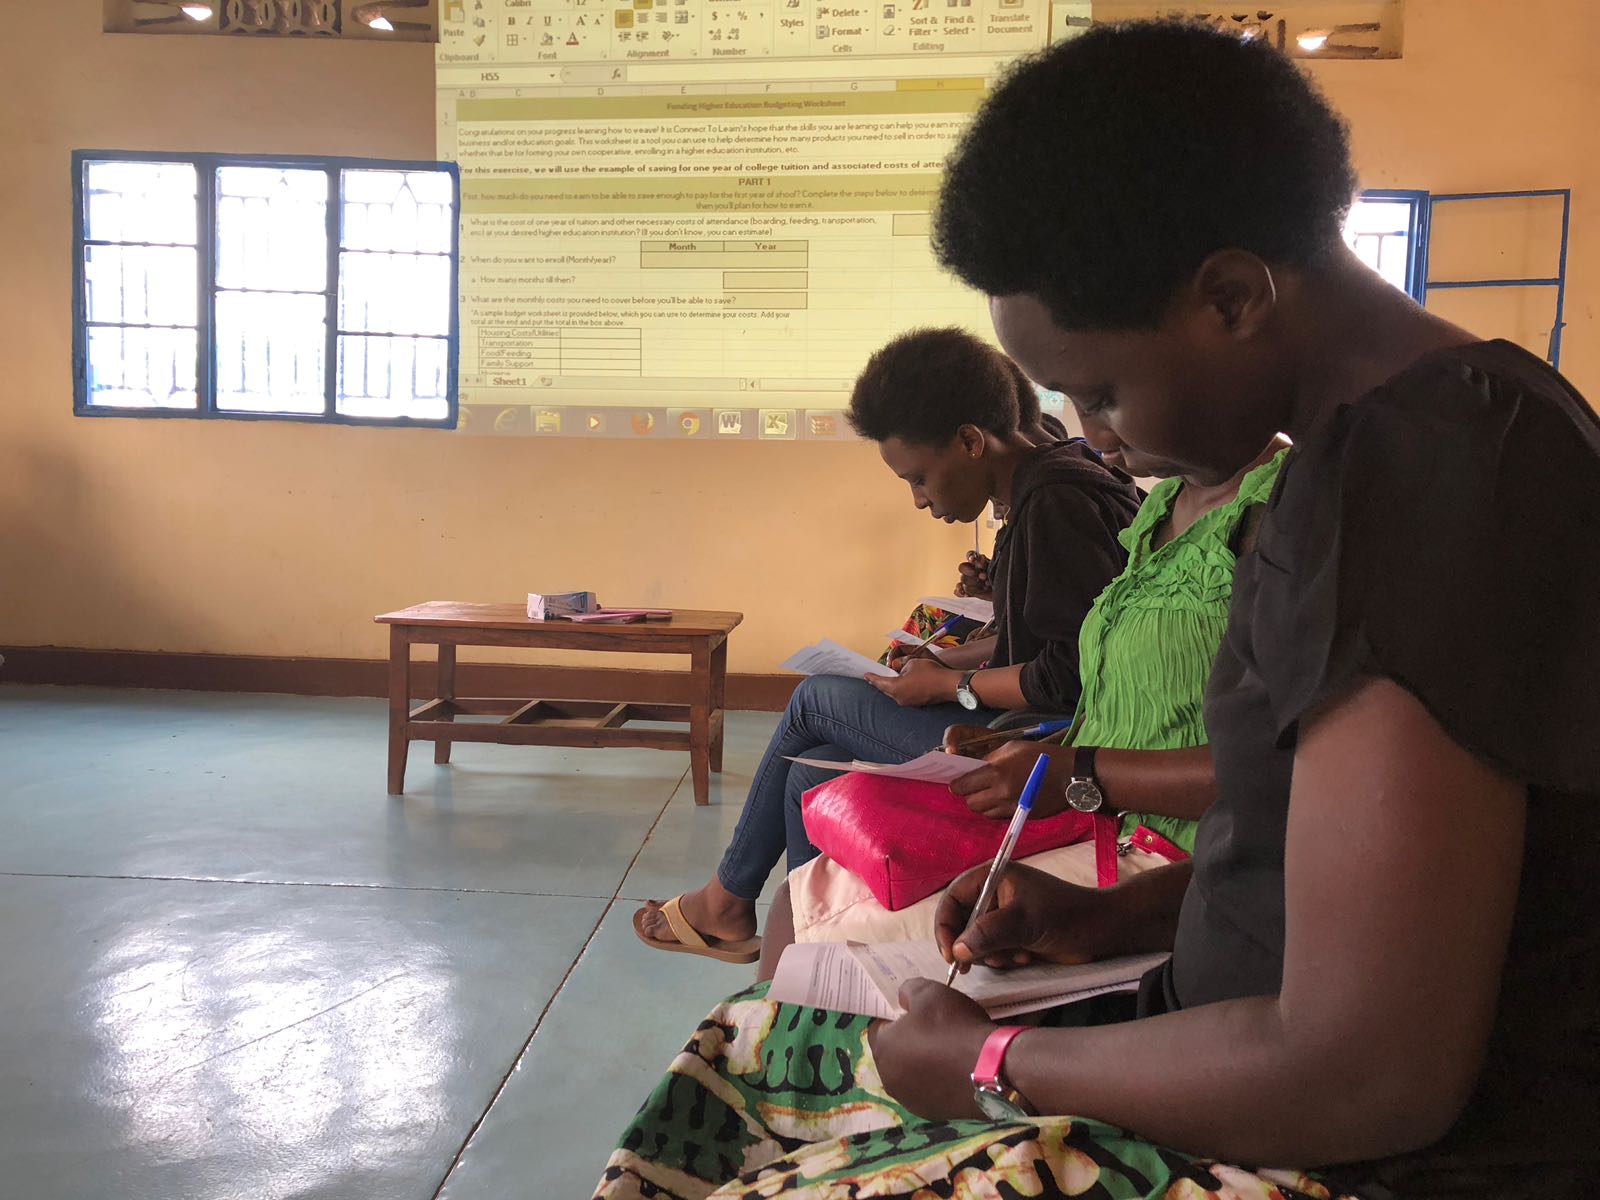 Women from Millennium Villages Project (MVP) are opening businesses through the Connect To Learn Initiative